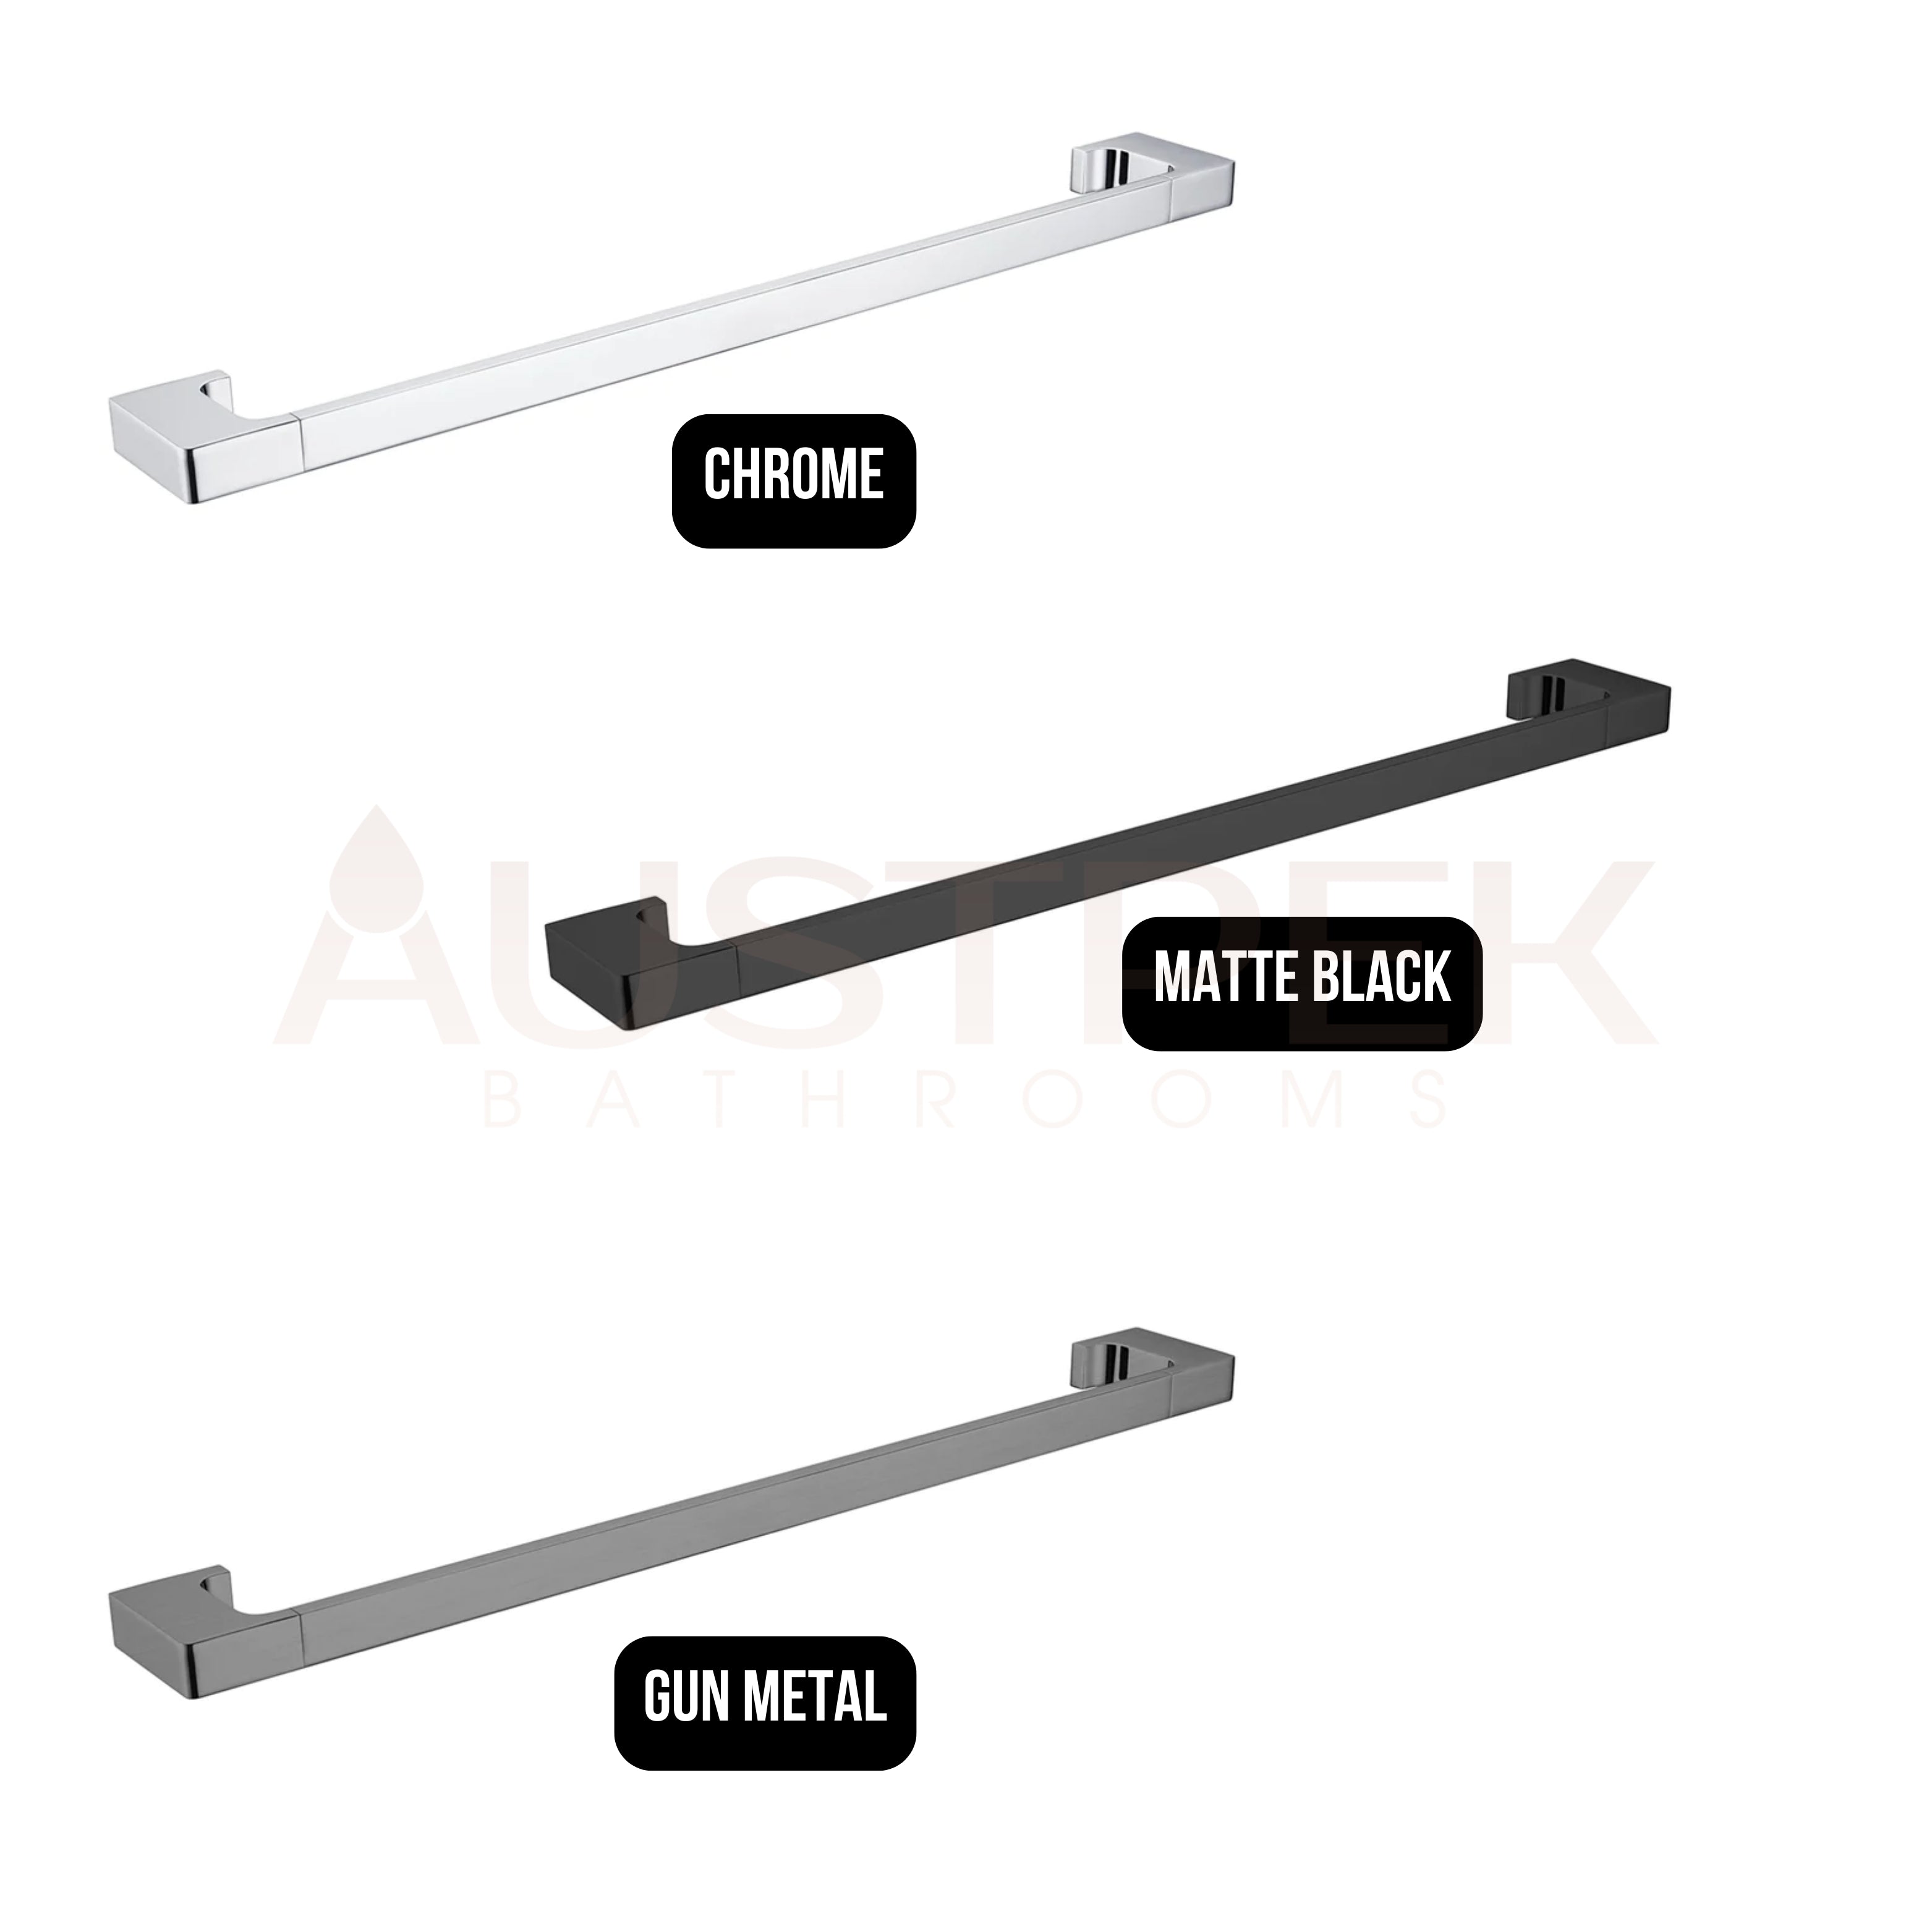 NERO PEARL NON-HEATED SINGLE TOWEL RAIL MATTE BLACK (AVAILABLE IN 600MM AND 800MM)